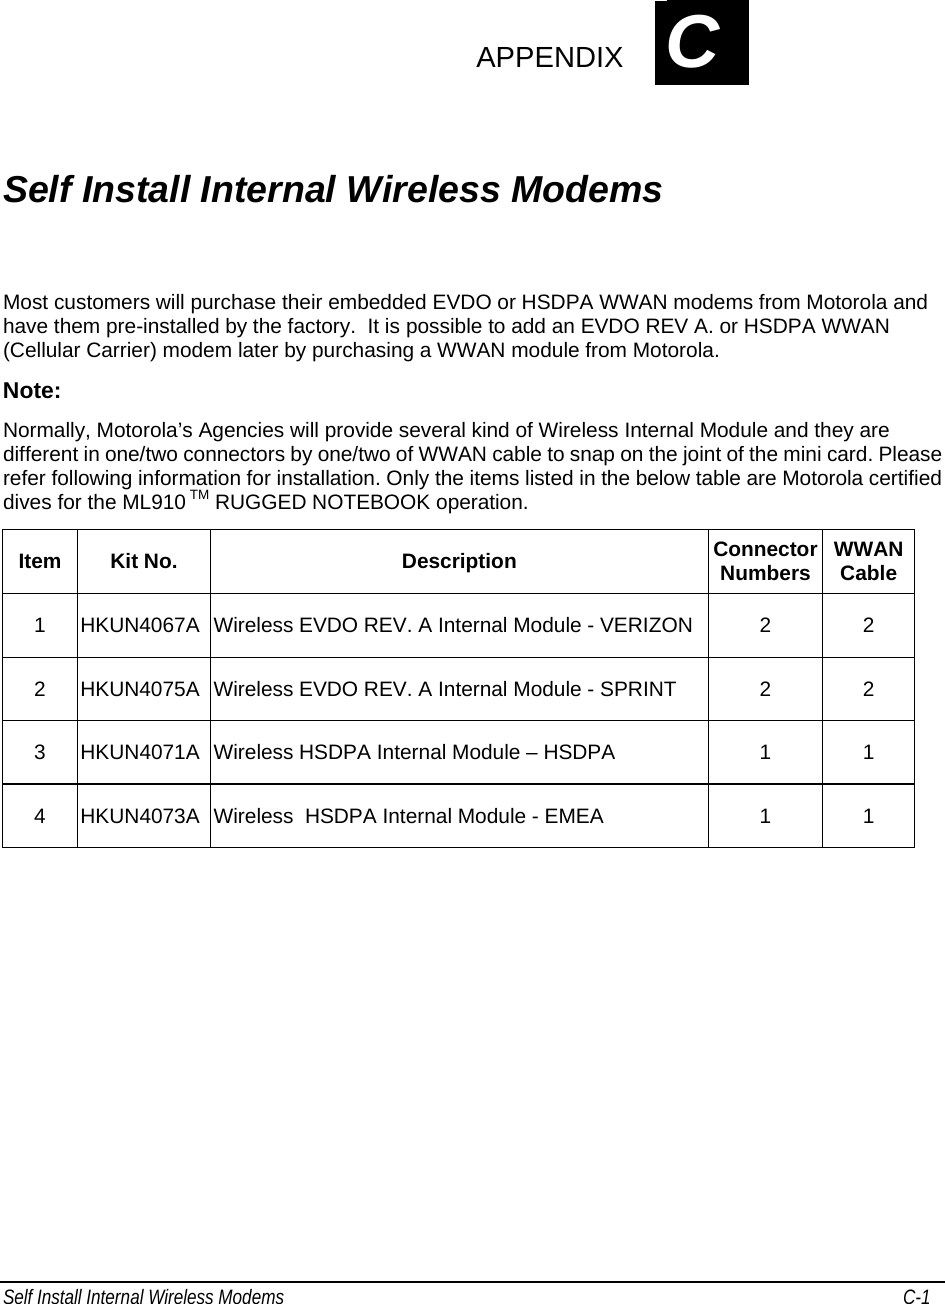 Self Install Internal Wireless Modems   C-1      APPENDIX APPENDIX APPENDIX                                             C Self Install Internal Wireless Modems Most customers will purchase their embedded EVDO or HSDPA WWAN modems from Motorola and have them pre-installed by the factory.  It is possible to add an EVDO REV A. or HSDPA WWAN (Cellular Carrier) modem later by purchasing a WWAN module from Motorola.  Note:  Normally, Motorola’s Agencies will provide several kind of Wireless Internal Module and they are different in one/two connectors by one/two of WWAN cable to snap on the joint of the mini card. Please refer following information for installation. Only the items listed in the below table are Motorola certified dives for the ML910 TM RUGGED NOTEBOOK operation. Item  Kit No.   Description  Connector Numbers  WWAN Cable 1  HKUN4067A  Wireless EVDO REV. A Internal Module - VERIZON  2  2 2  HKUN4075A  Wireless EVDO REV. A Internal Module - SPRINT  2  2 3  HKUN4071A  Wireless HSDPA Internal Module – HSDPA   1  1 4  HKUN4073A  Wireless  HSDPA Internal Module - EMEA  1  1  